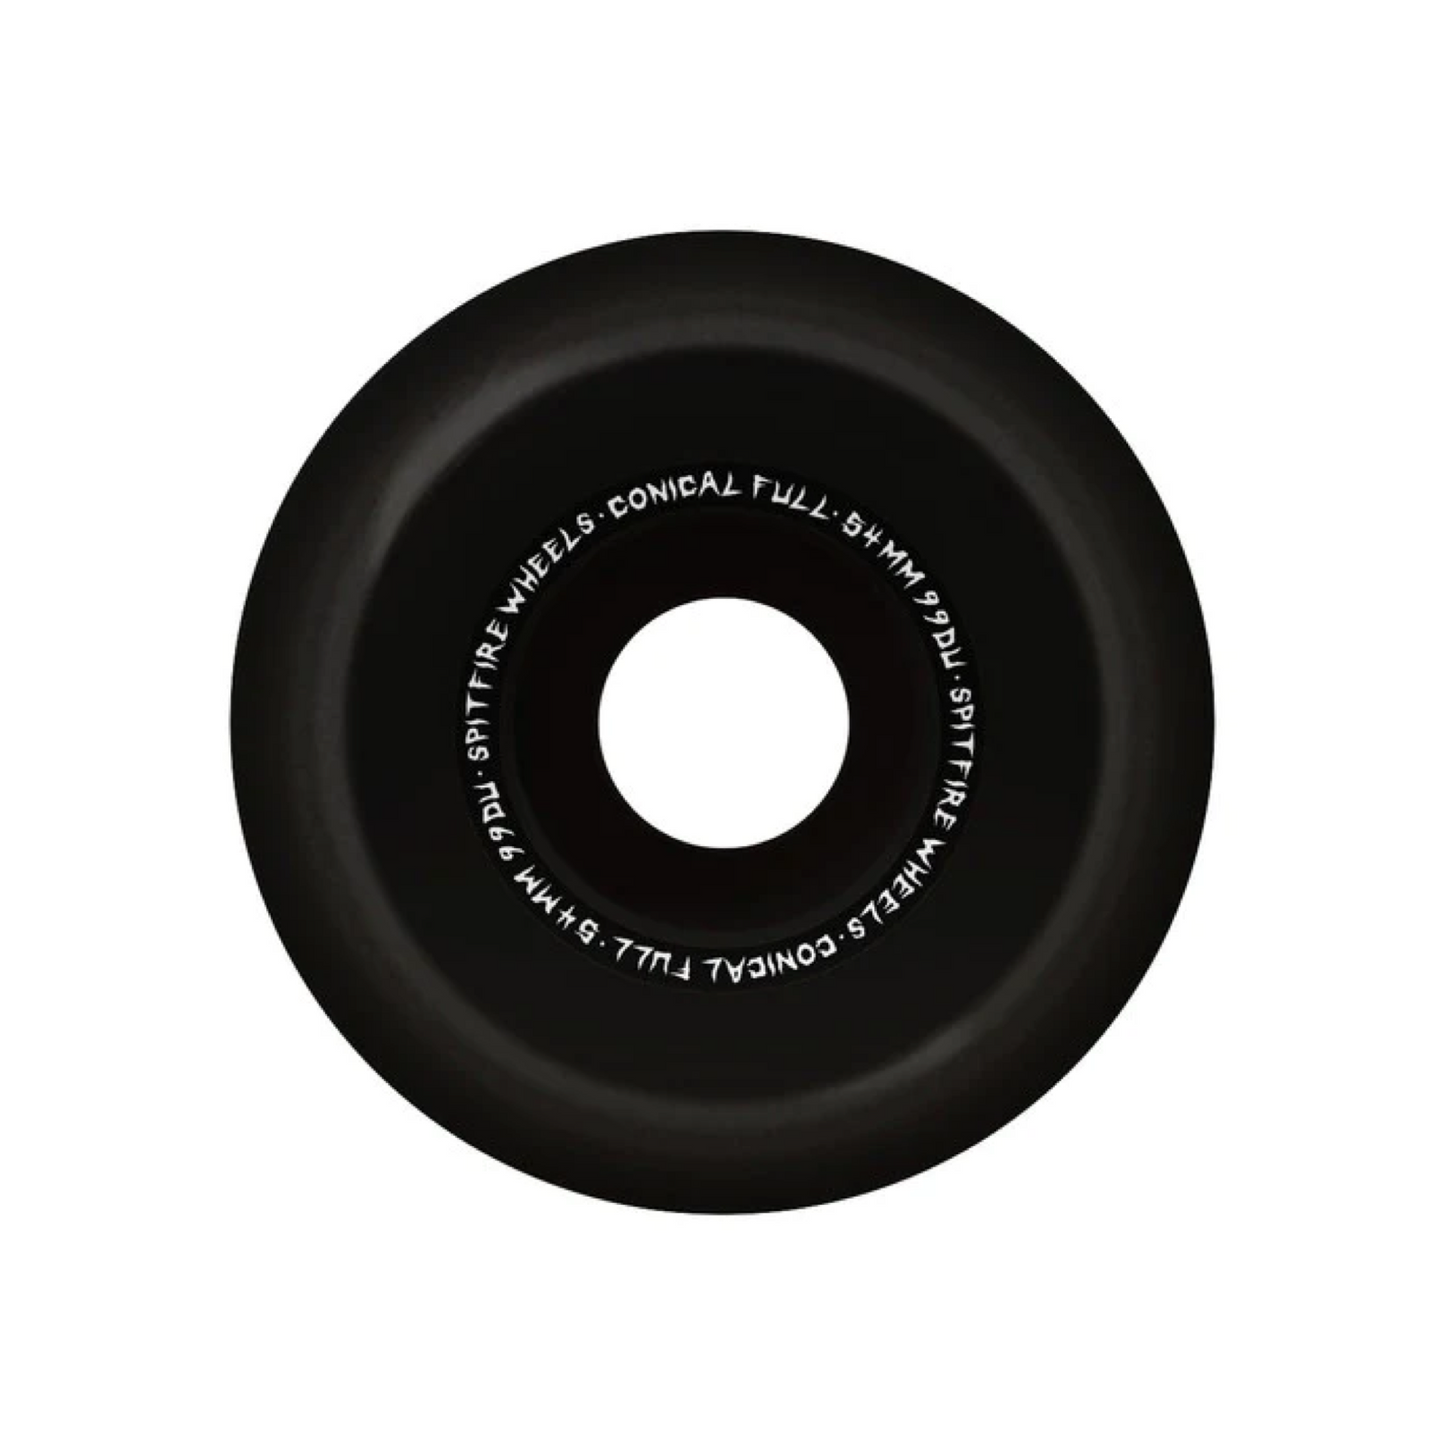 SPITFIRE DECAY FORMULA FOUR 99 FULL CONICAL WHEELS 54MM